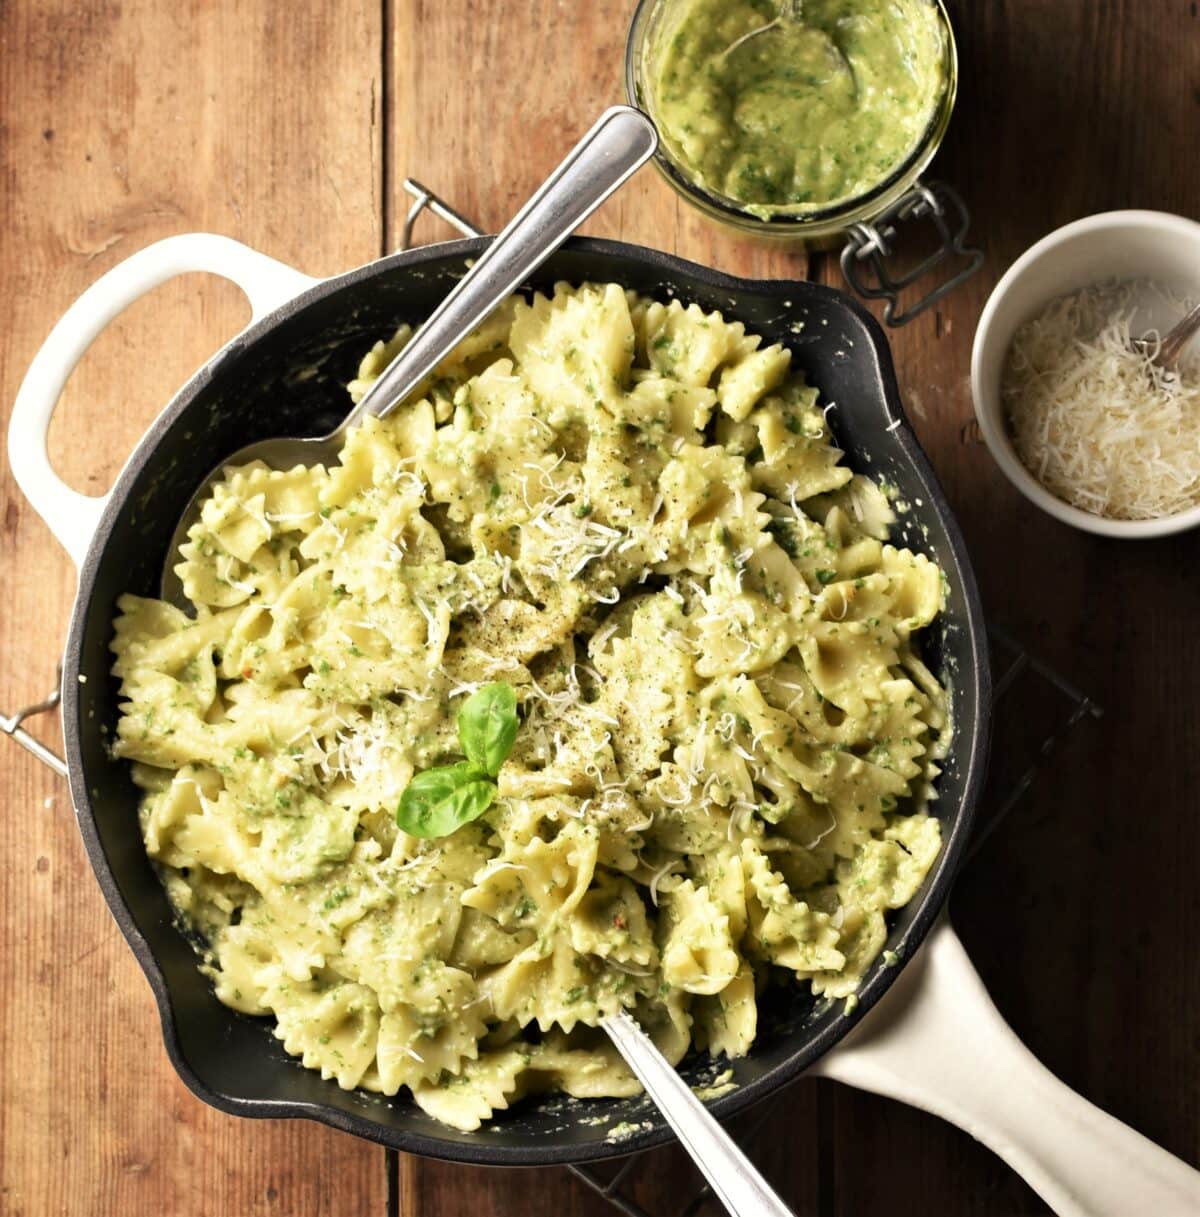 Top down view of avocado pesto pasta in skillet with 2 spoons, pesto and grated cheese in background.